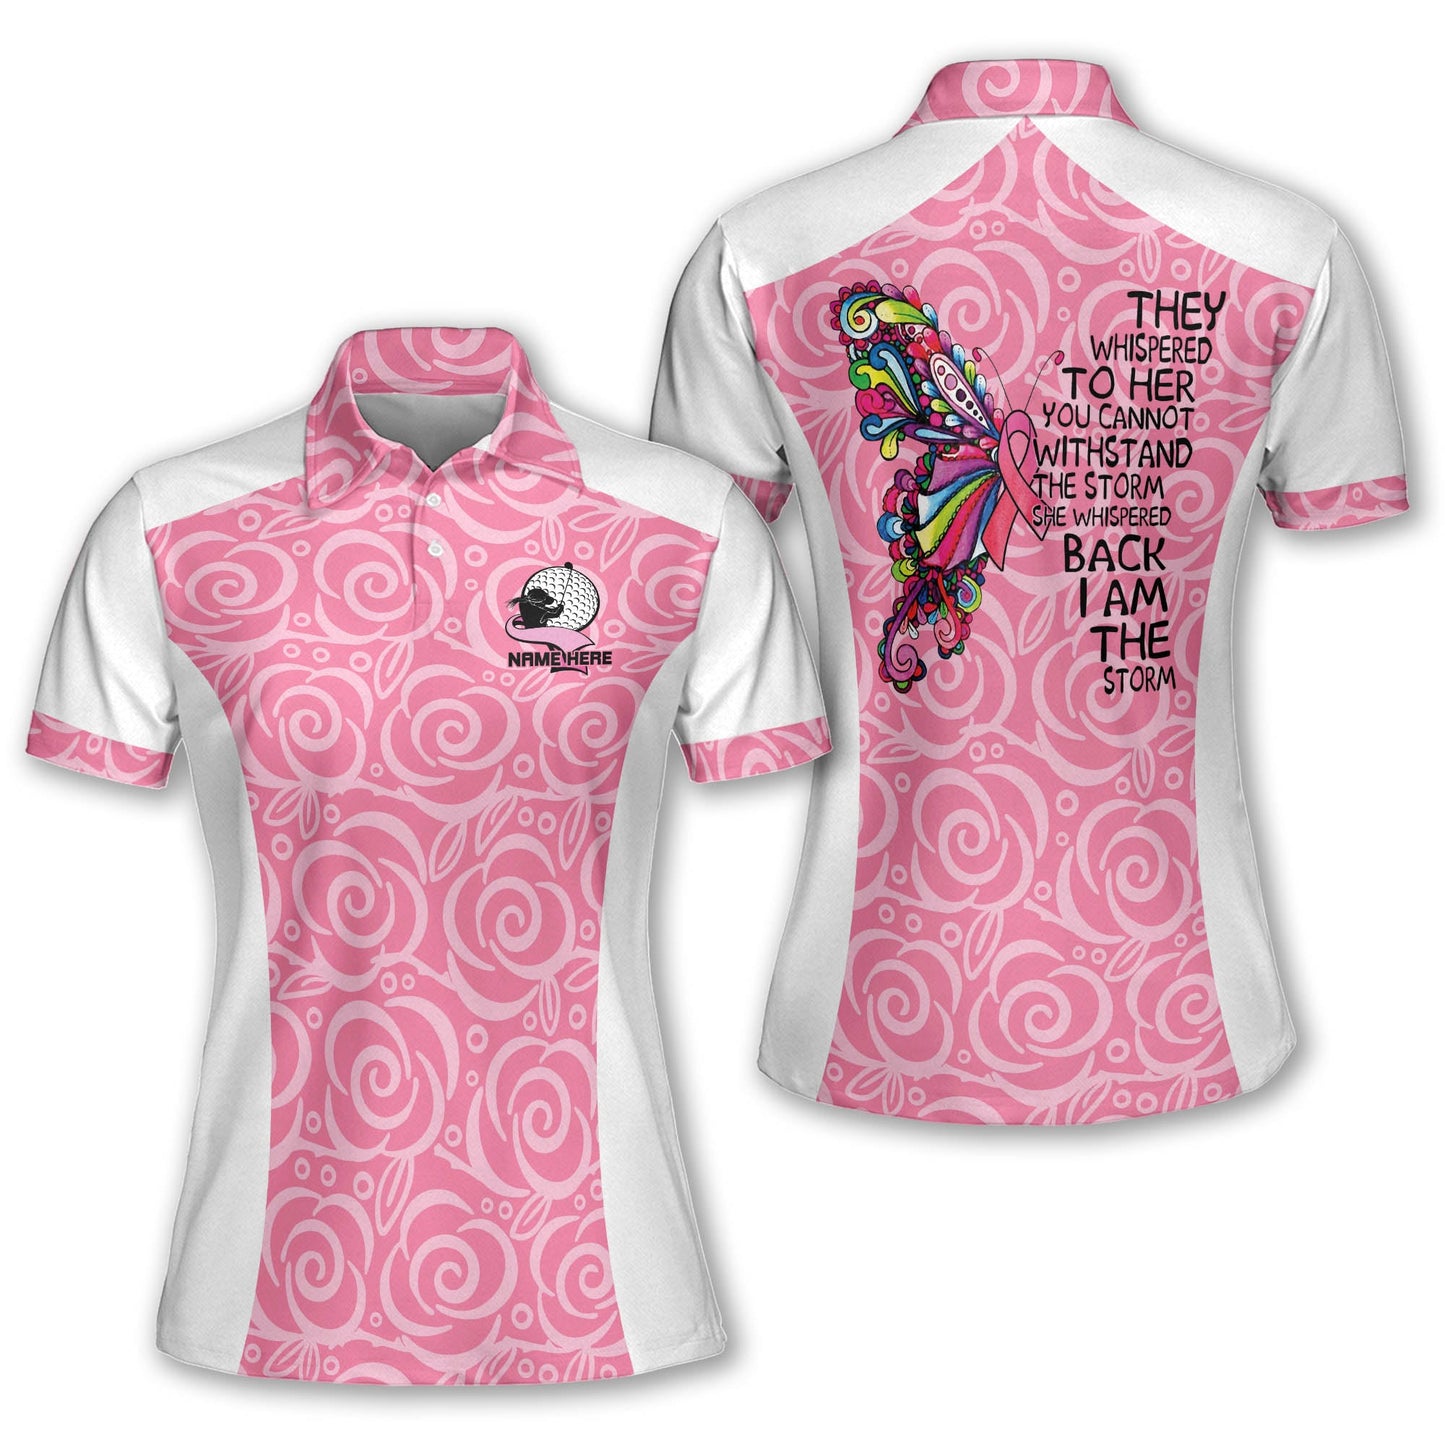 Womens Funny Golf Shirt for The Course GW0038